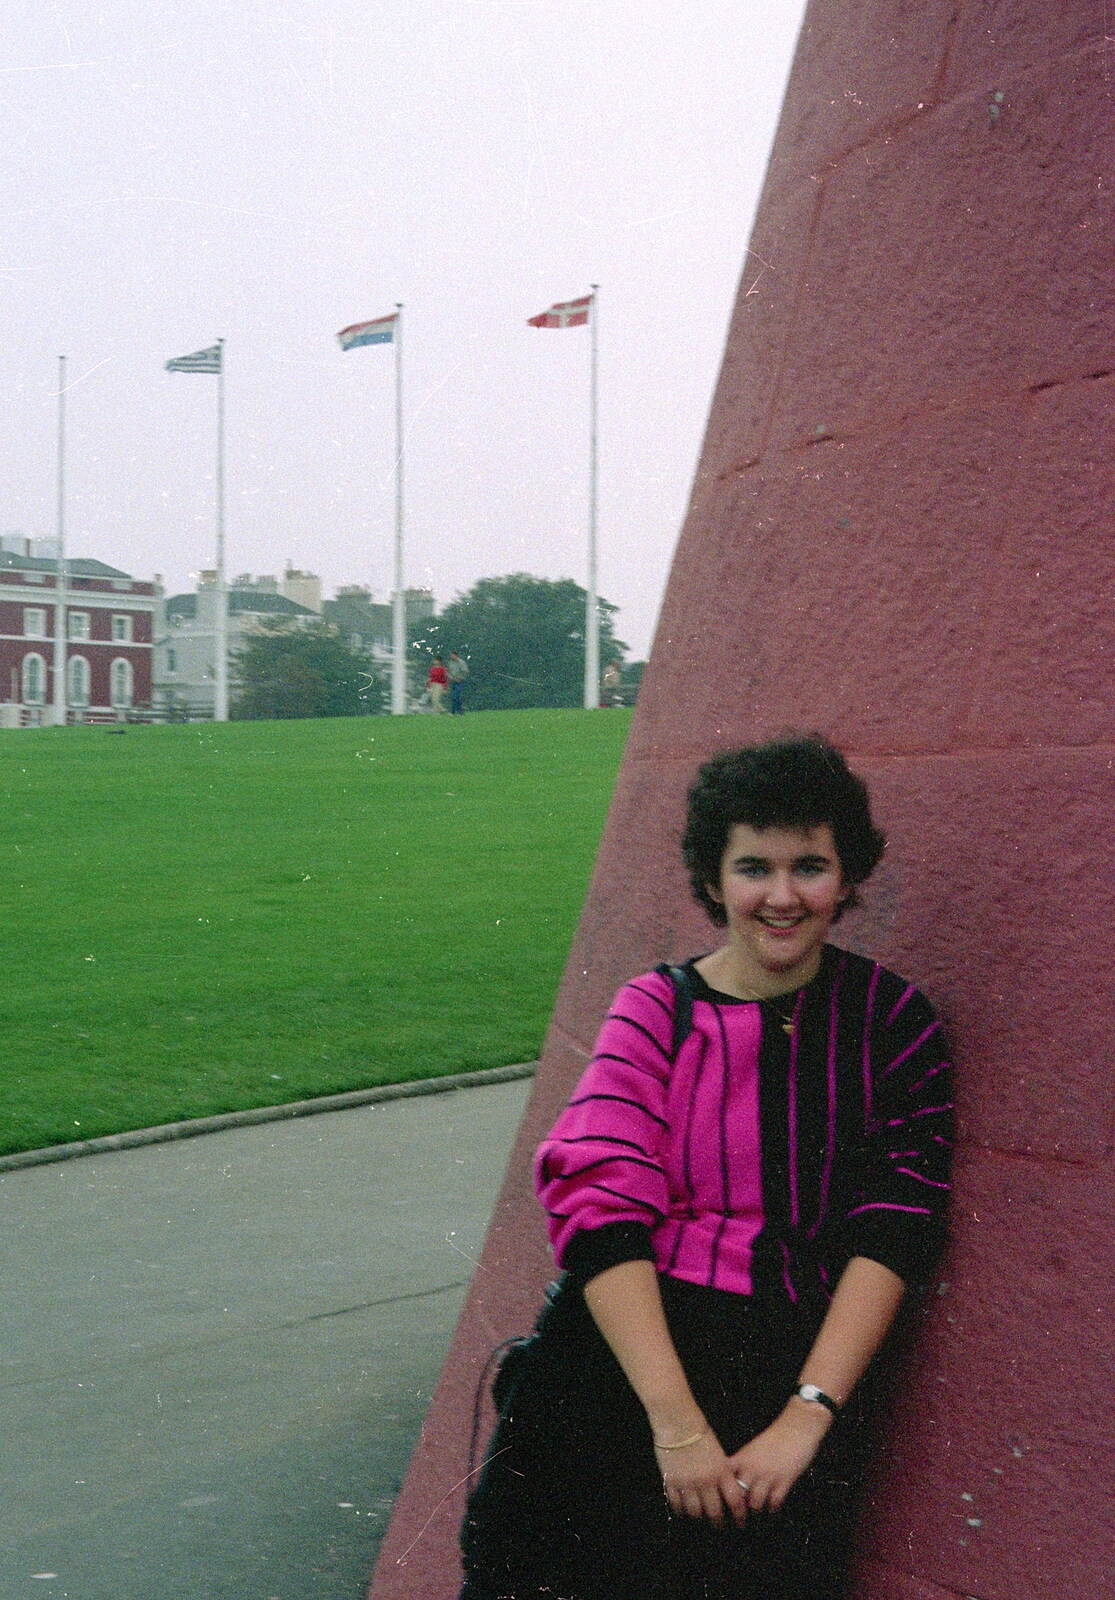 Liz at the bottom of Smeaton's Tower from Uni: First Weeks At Polytechnic, Umbrellas and a Visit From Liz, Plymouth - 26th September 1985